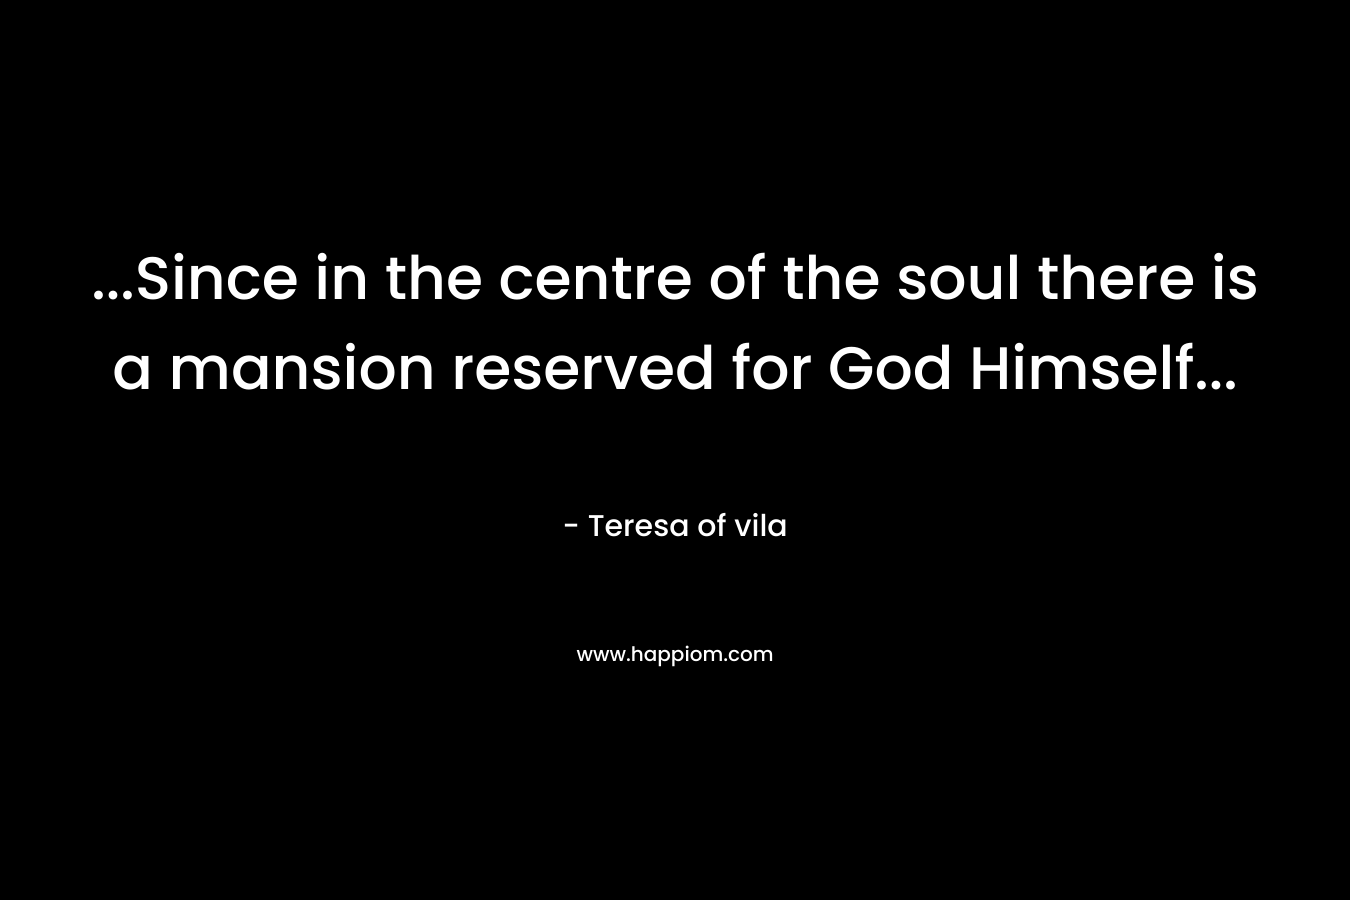 ...Since in the centre of the soul there is a mansion reserved for God Himself...